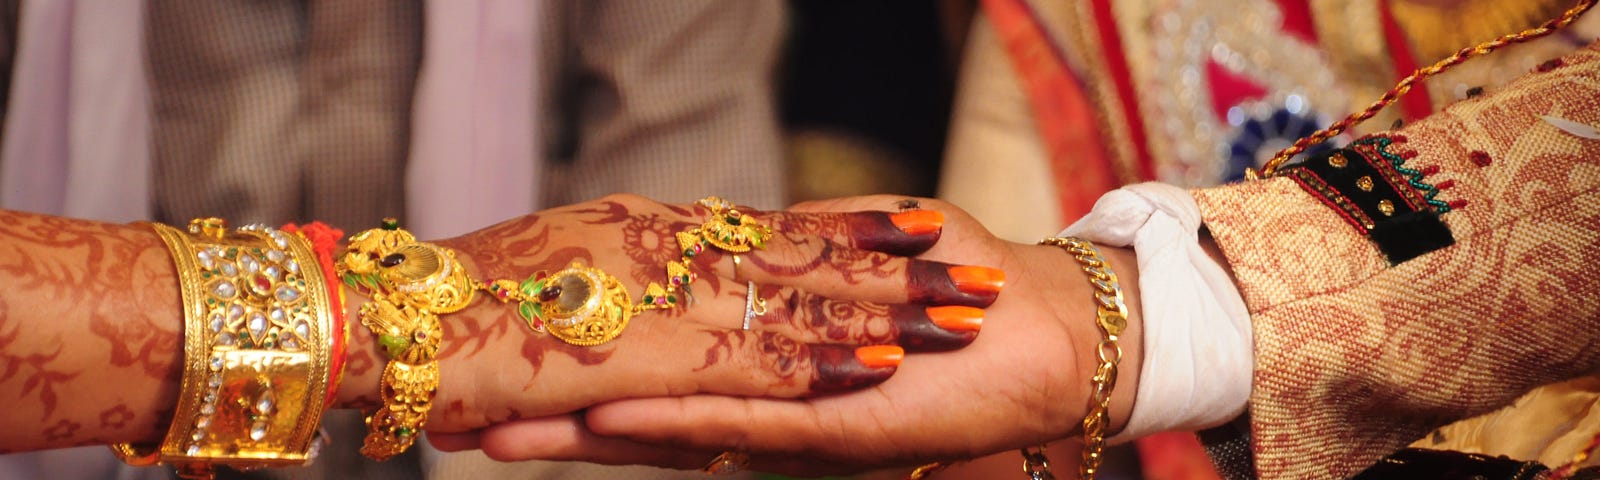 an image from Indian wedding. Image Credits: Unsplash